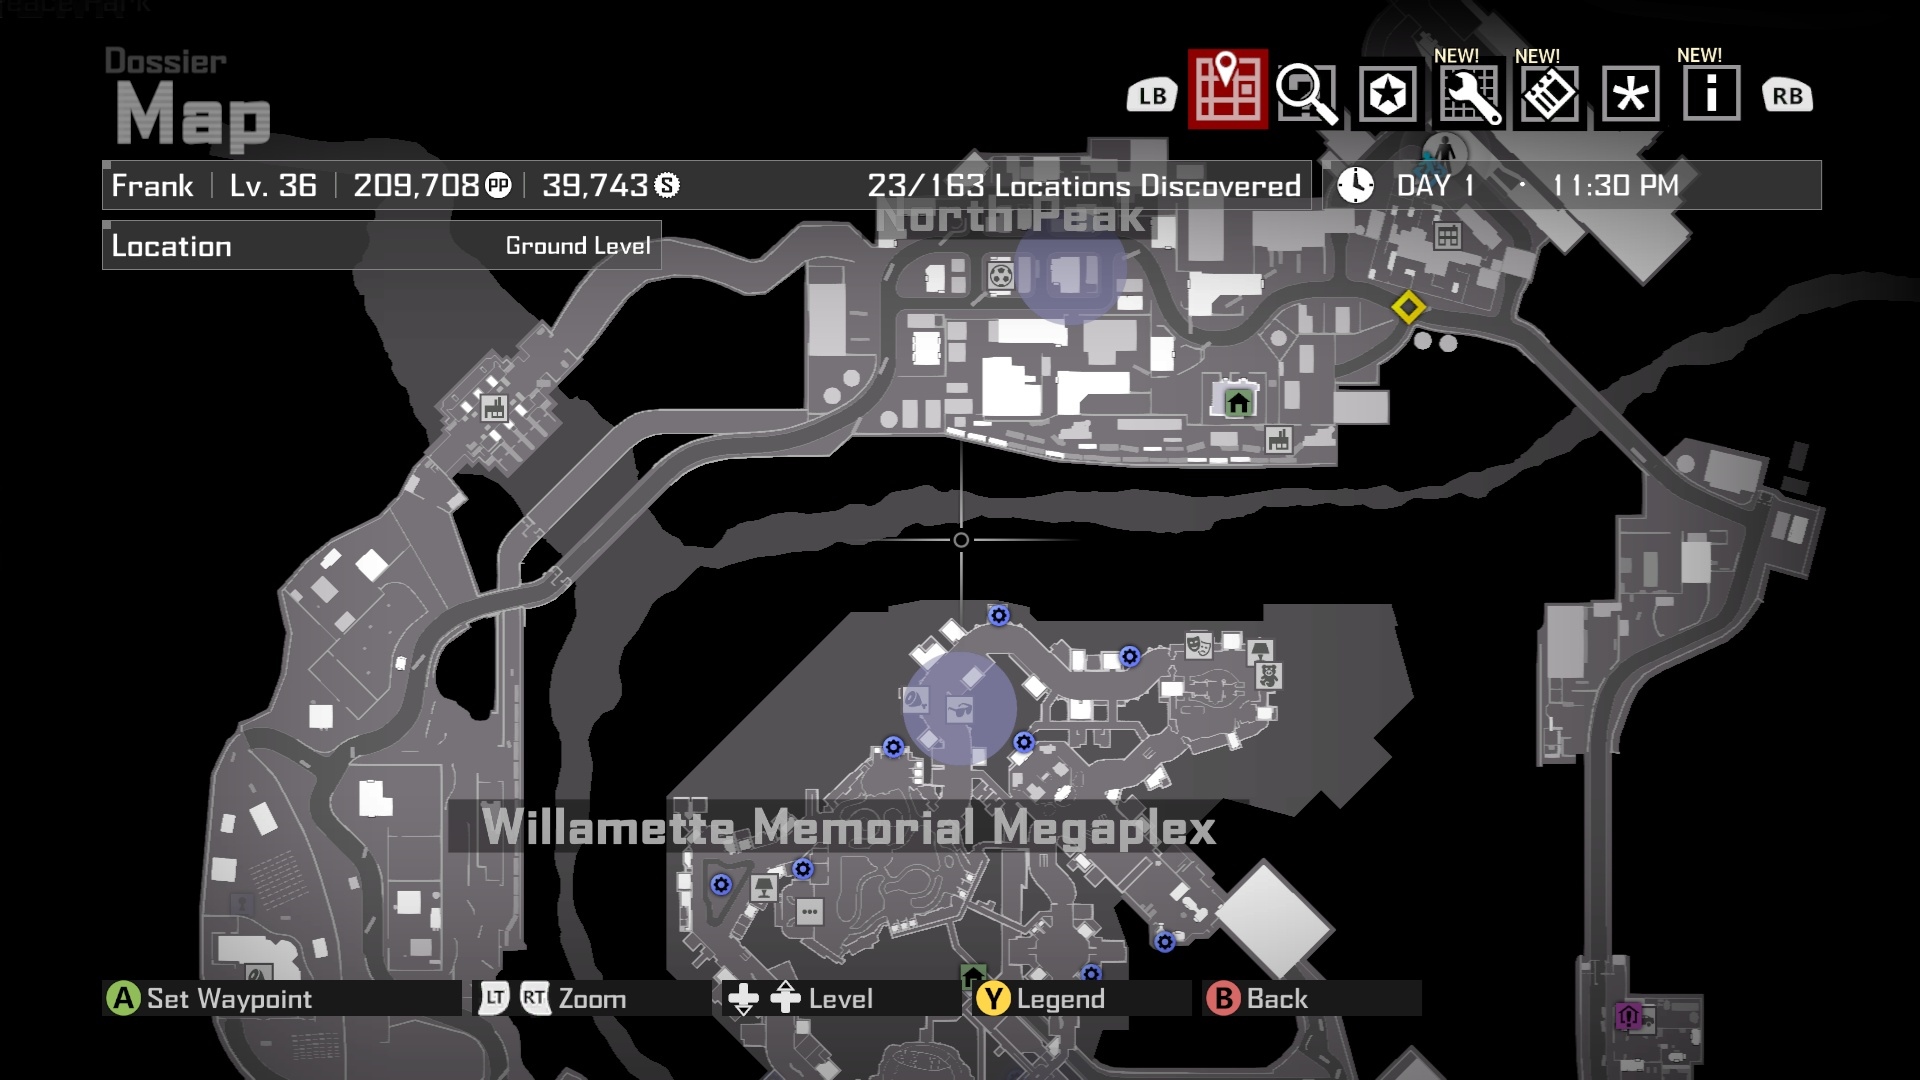 dead rising 4 map legend decoded